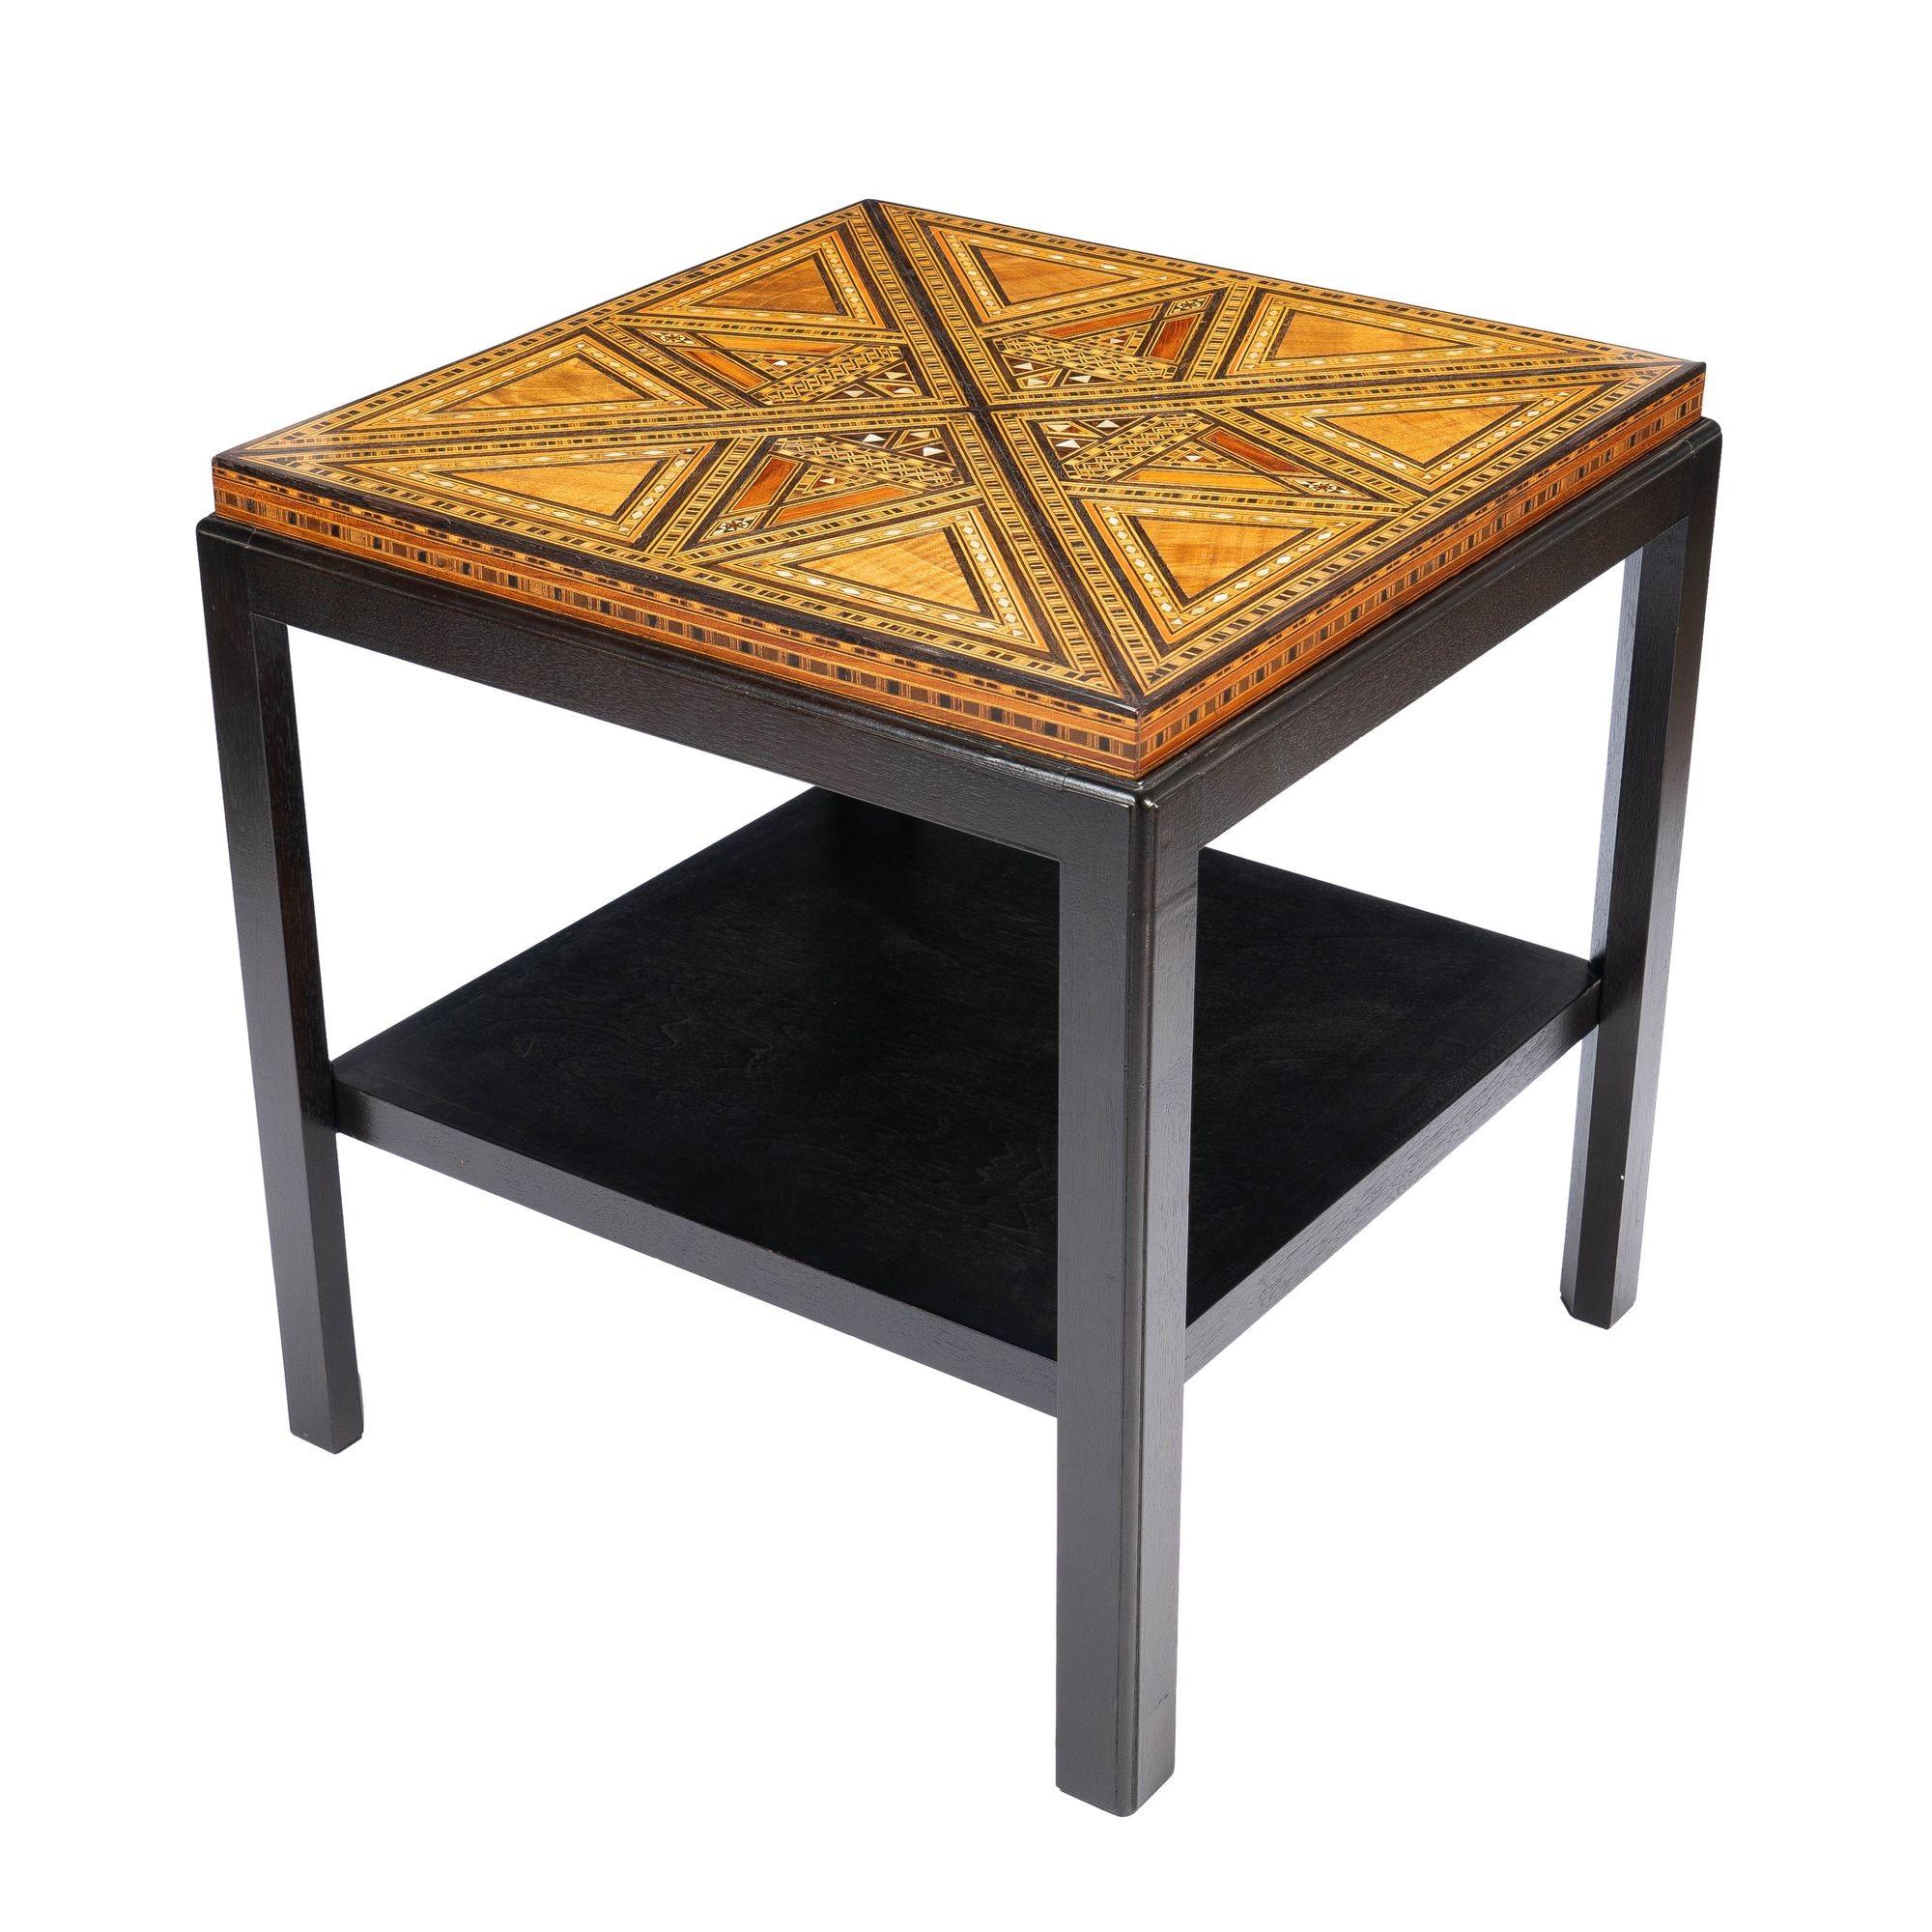 Damascus table top with geometric inlays of mixed hardwoods and Mother-of-Pearl. The table top has been remounted on a custom walnut stand with X stretcher & removable shelf.
Damascus, Syria, circa 1900.